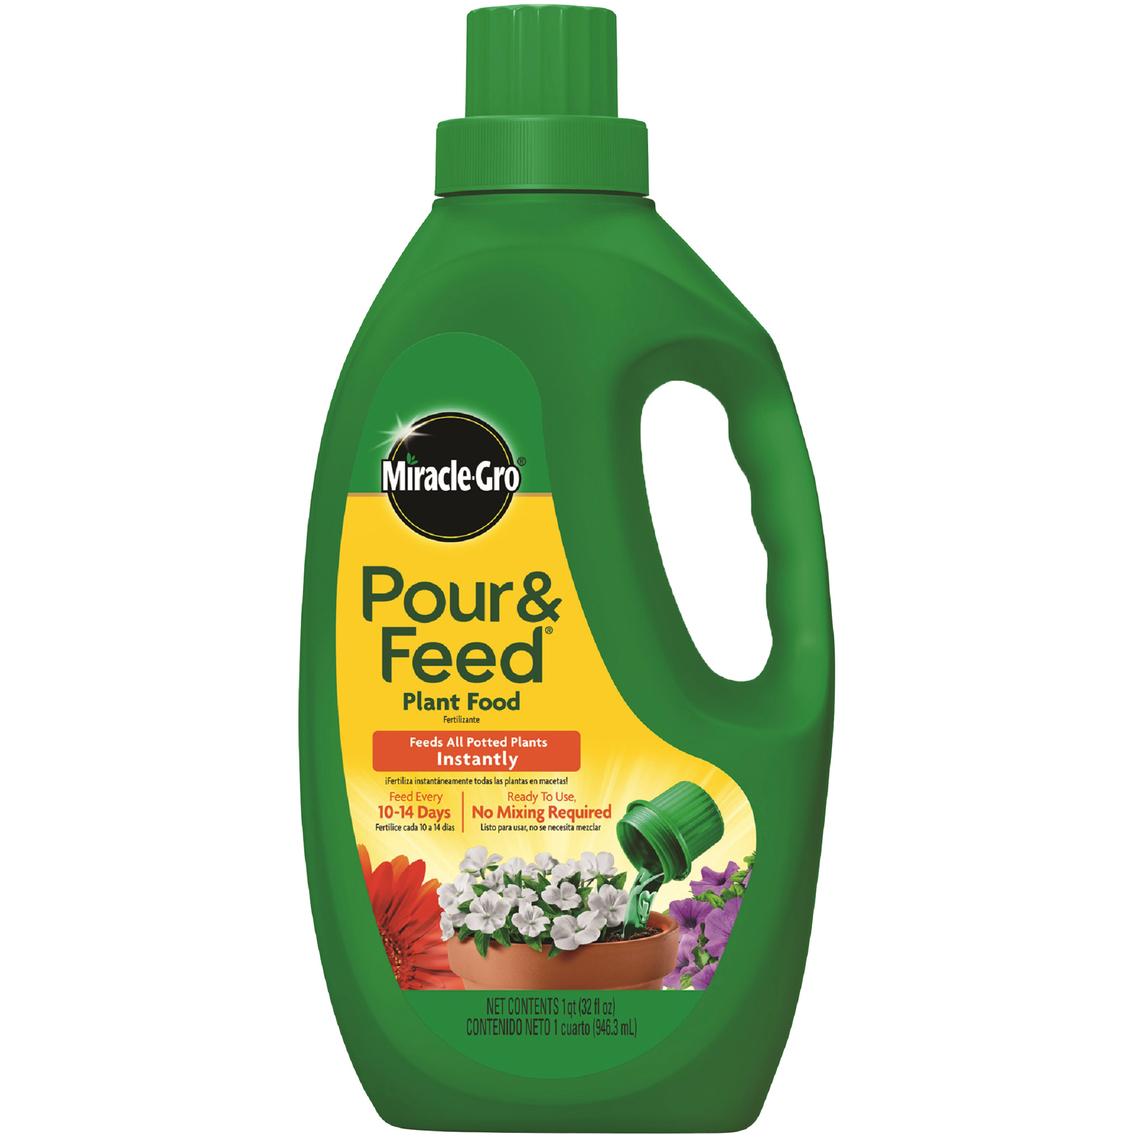 Miracle-Gro Pour & Feed Liquid Plant Food 32 oz.